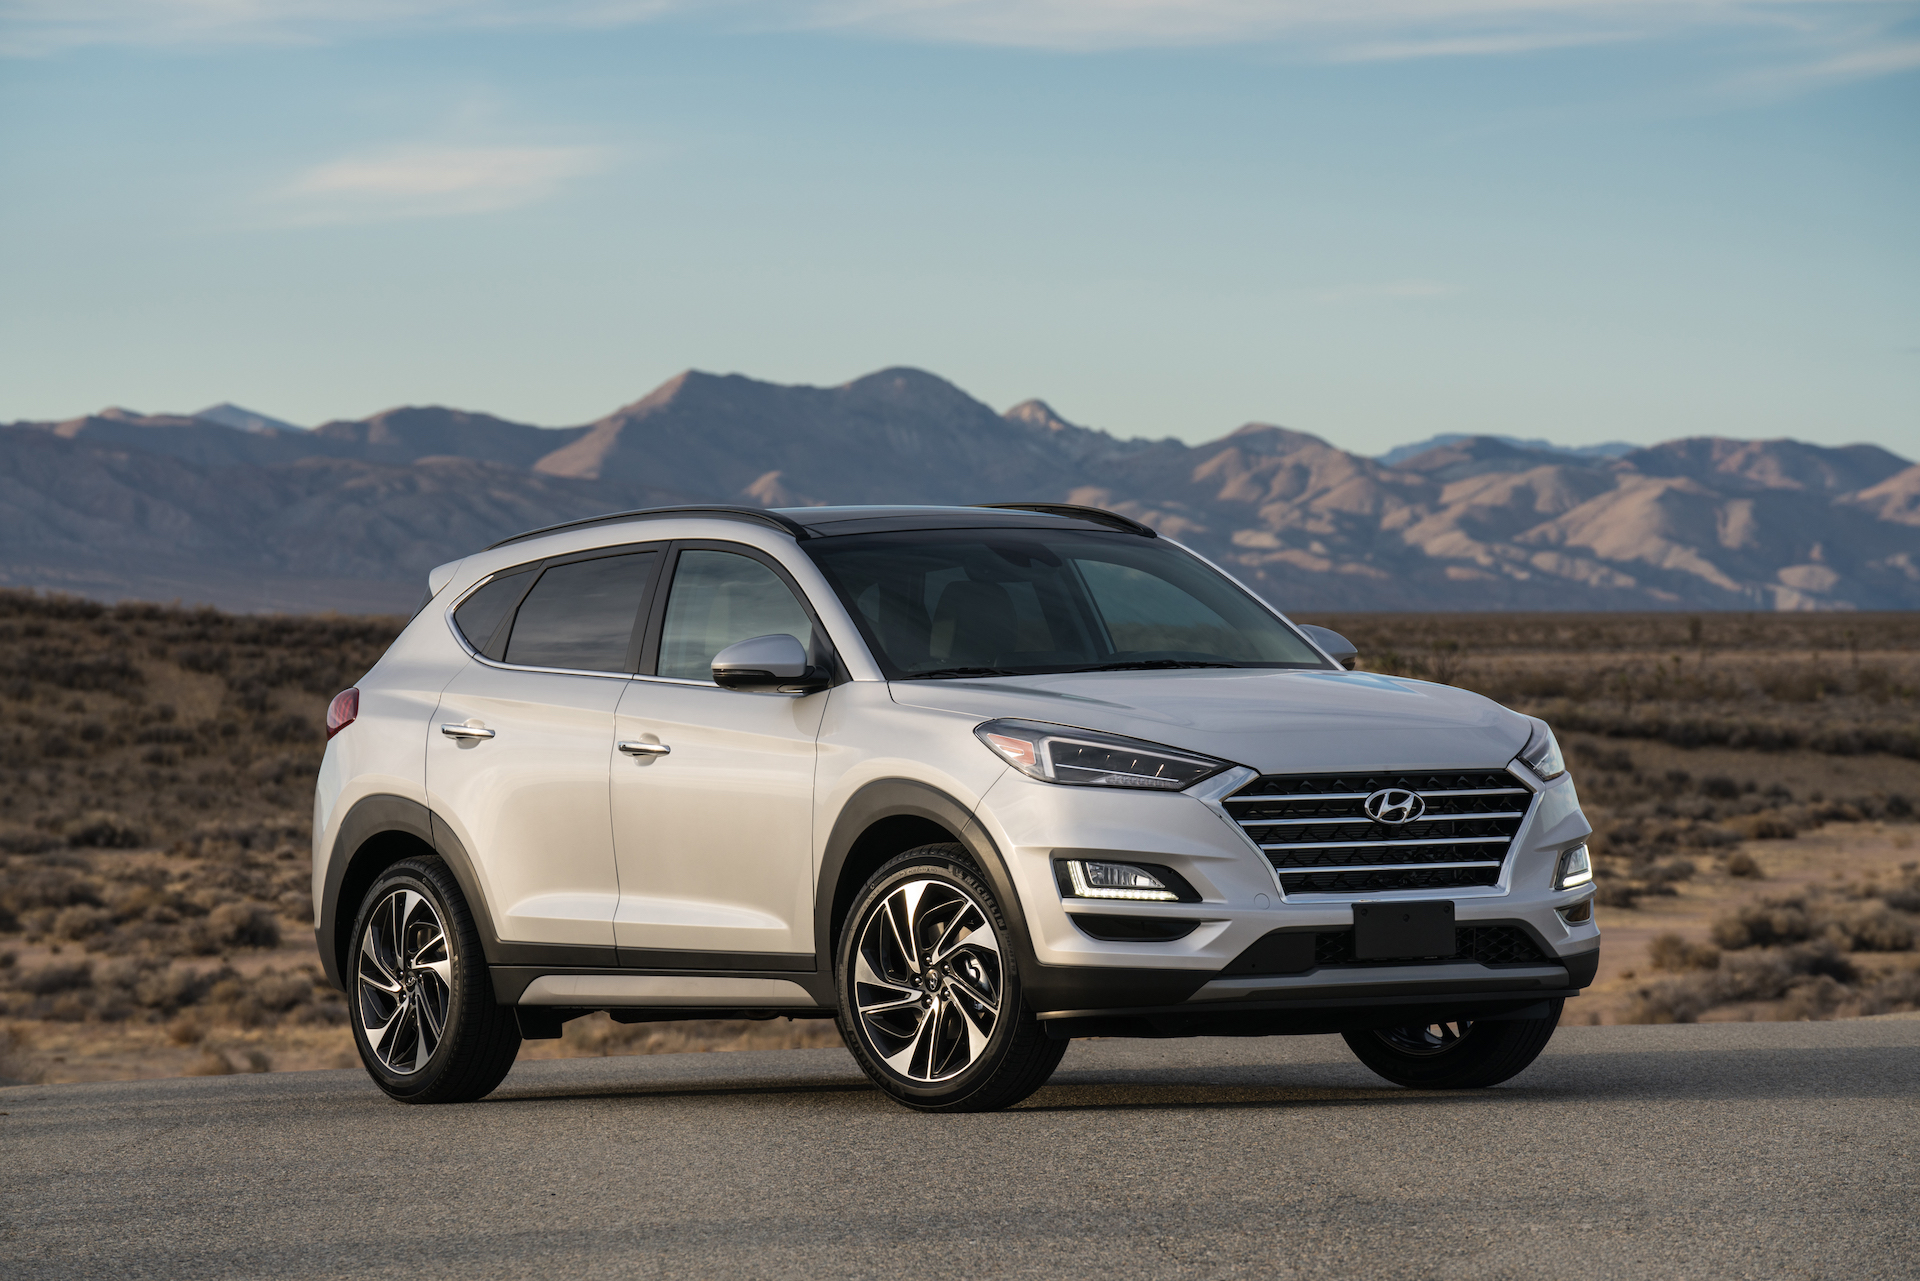 2020 Hyundai Tucson Review, Ratings, Specs, Prices, and Photos - The Car Connection